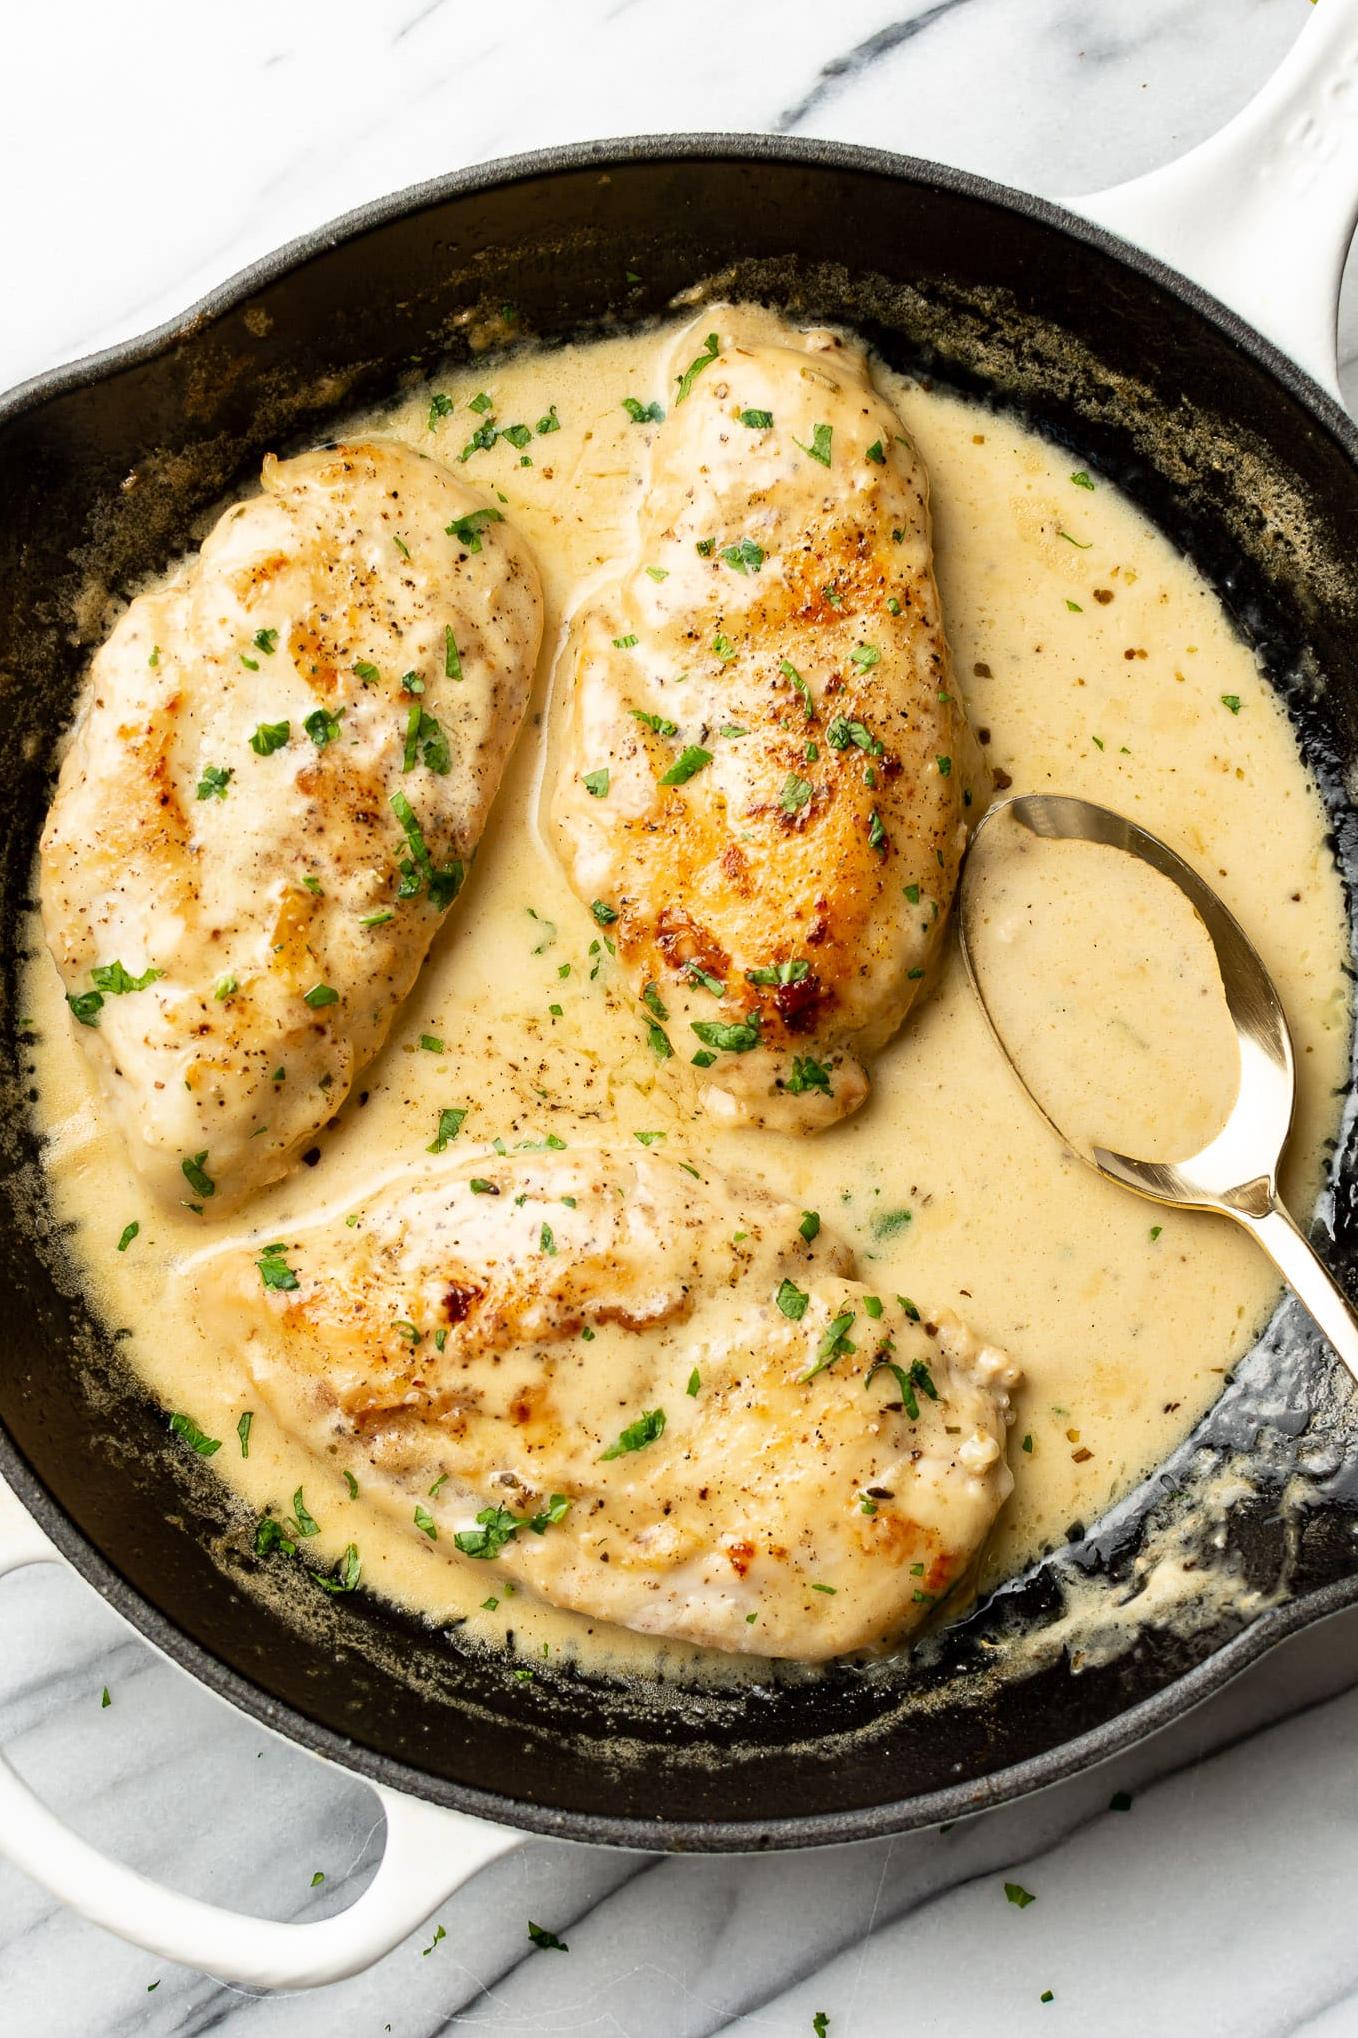  One of my all-time favorite chicken recipes.